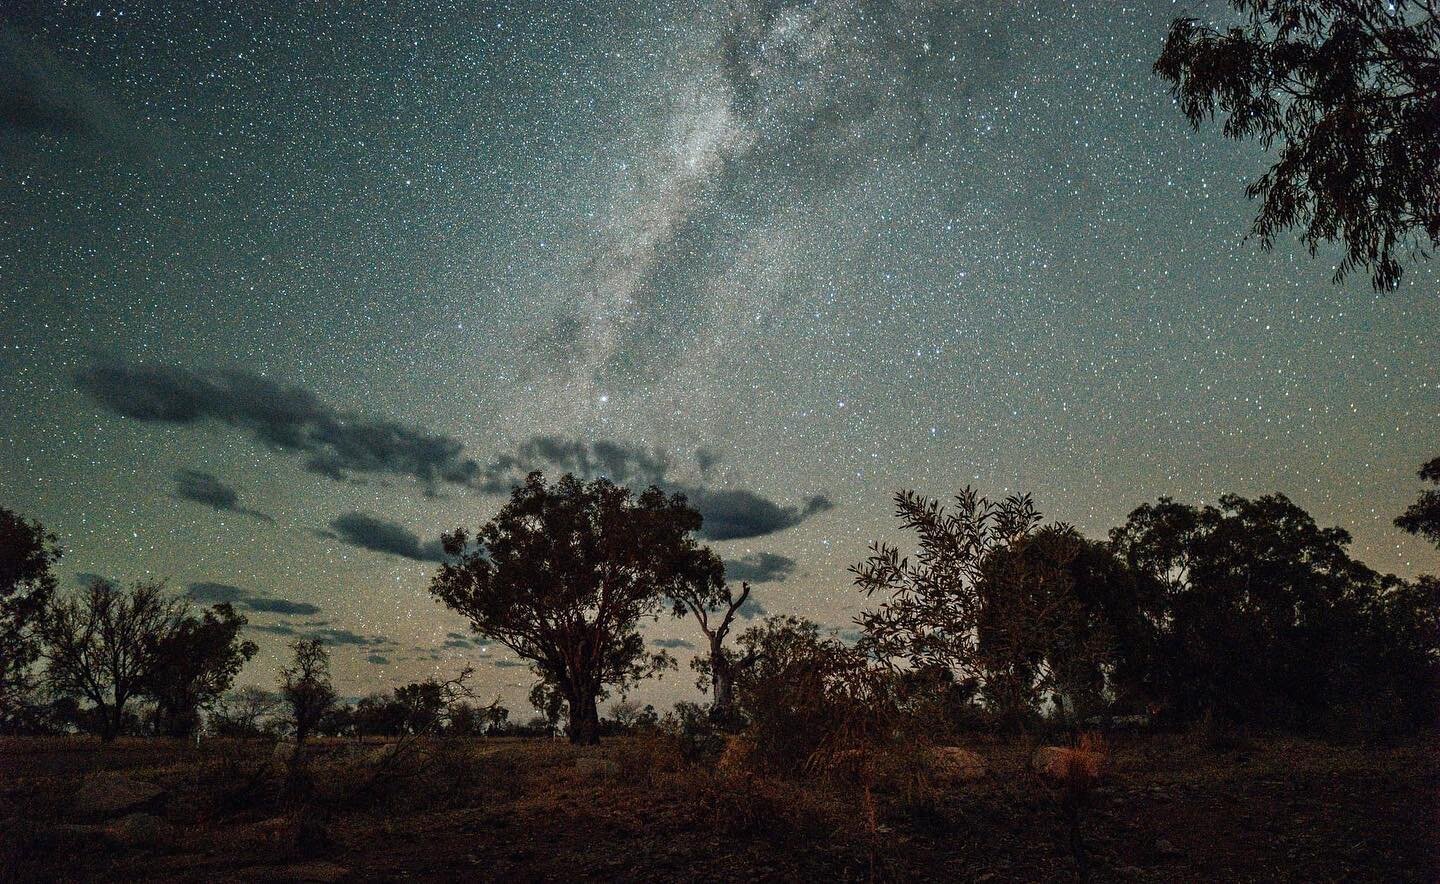 Loving it up here in the North West! Here&rsquo;s my (Laine&rsquo;s) first attempt at Astrophotography. So many stars! This was taken at Mary Pool, south of Kununurra.